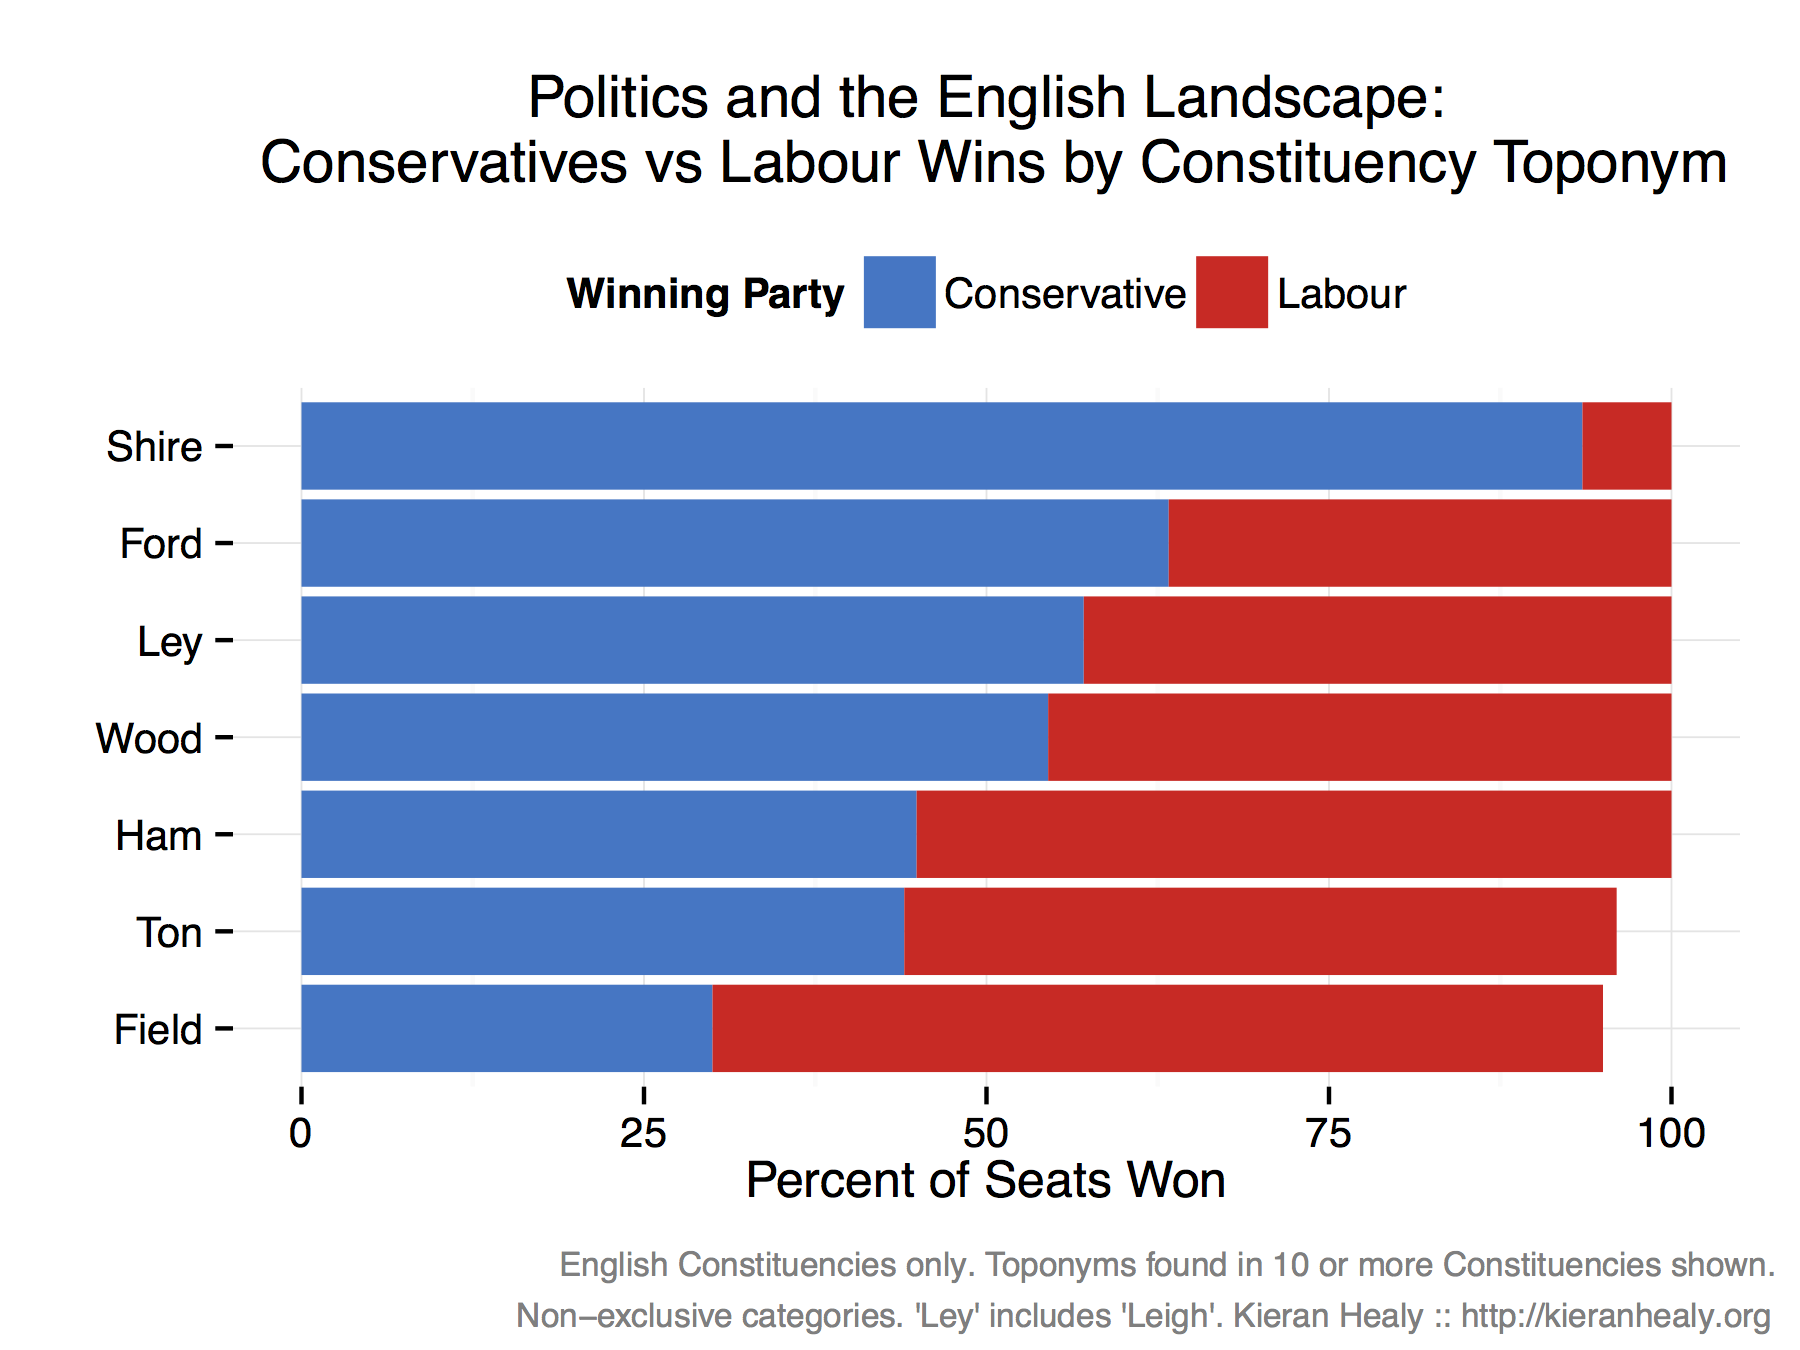 Constituencies by toponym and winning party.